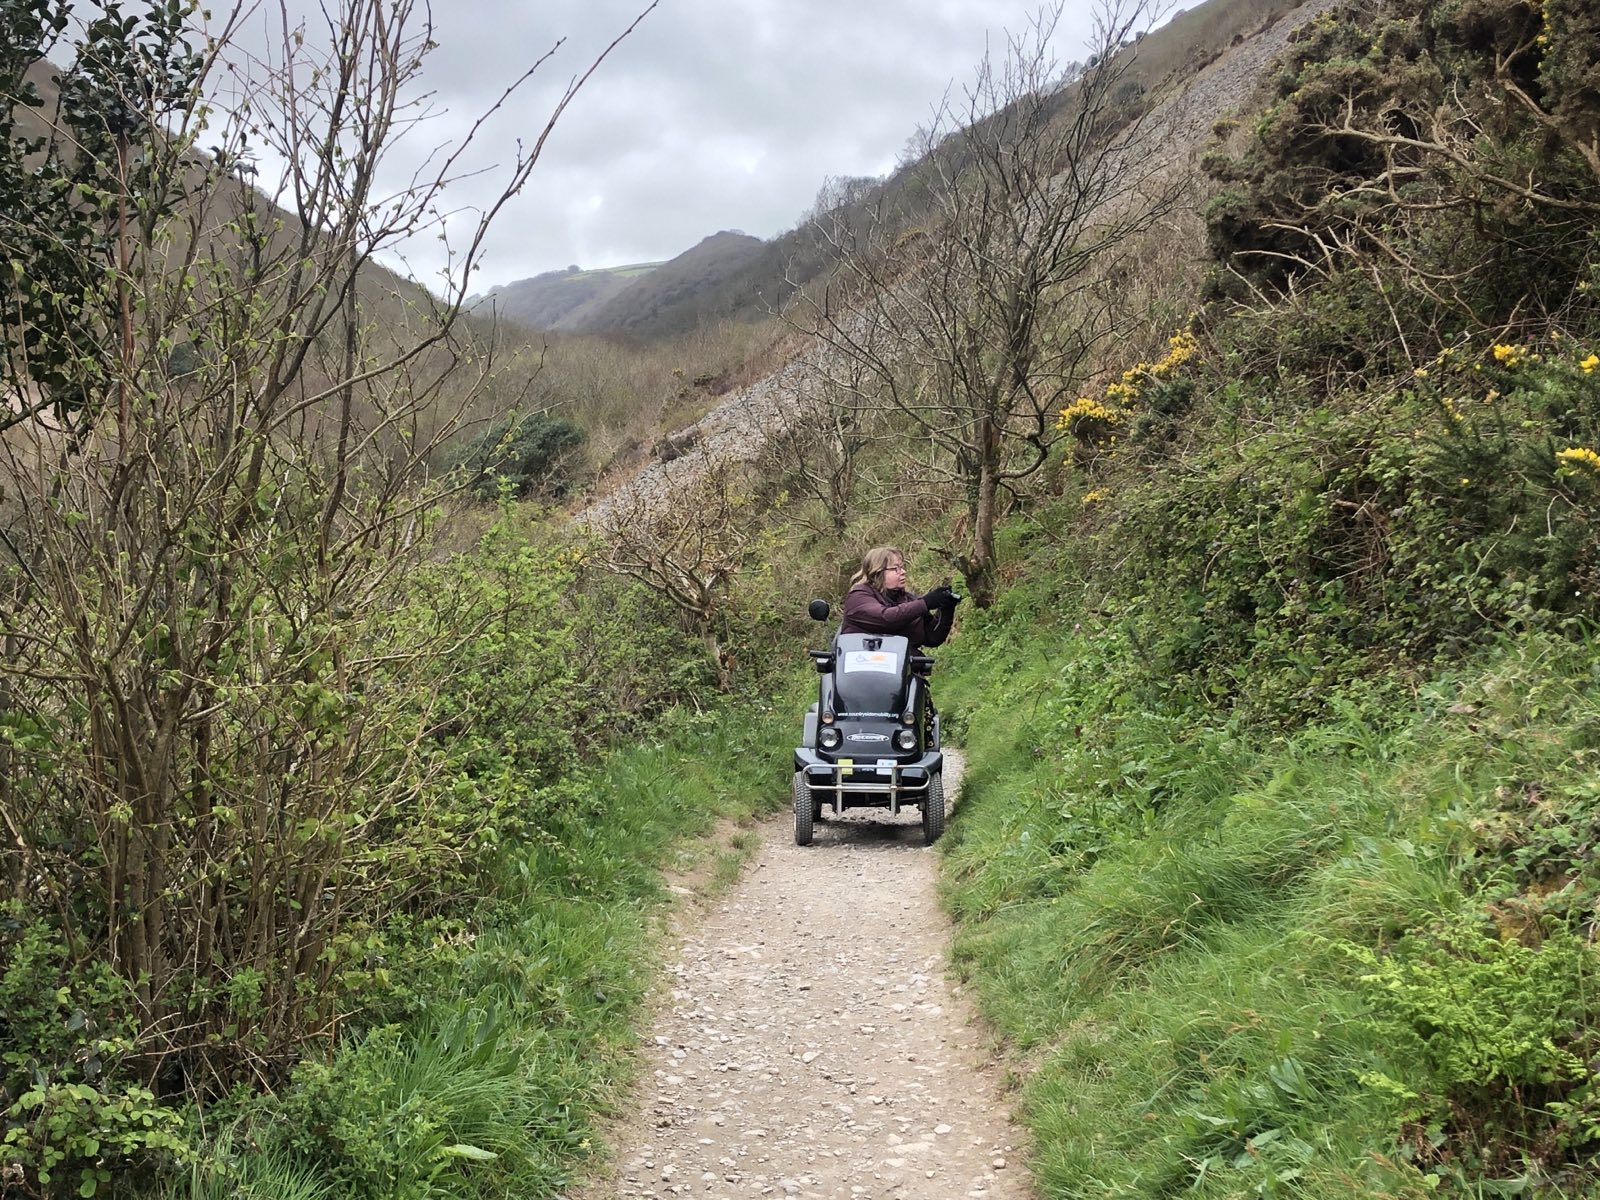 The white person on the tramper, only they aren't looking at the camera, because they are taking photos of wildflowers! You can see hints of high hills & a steep valley, behind.